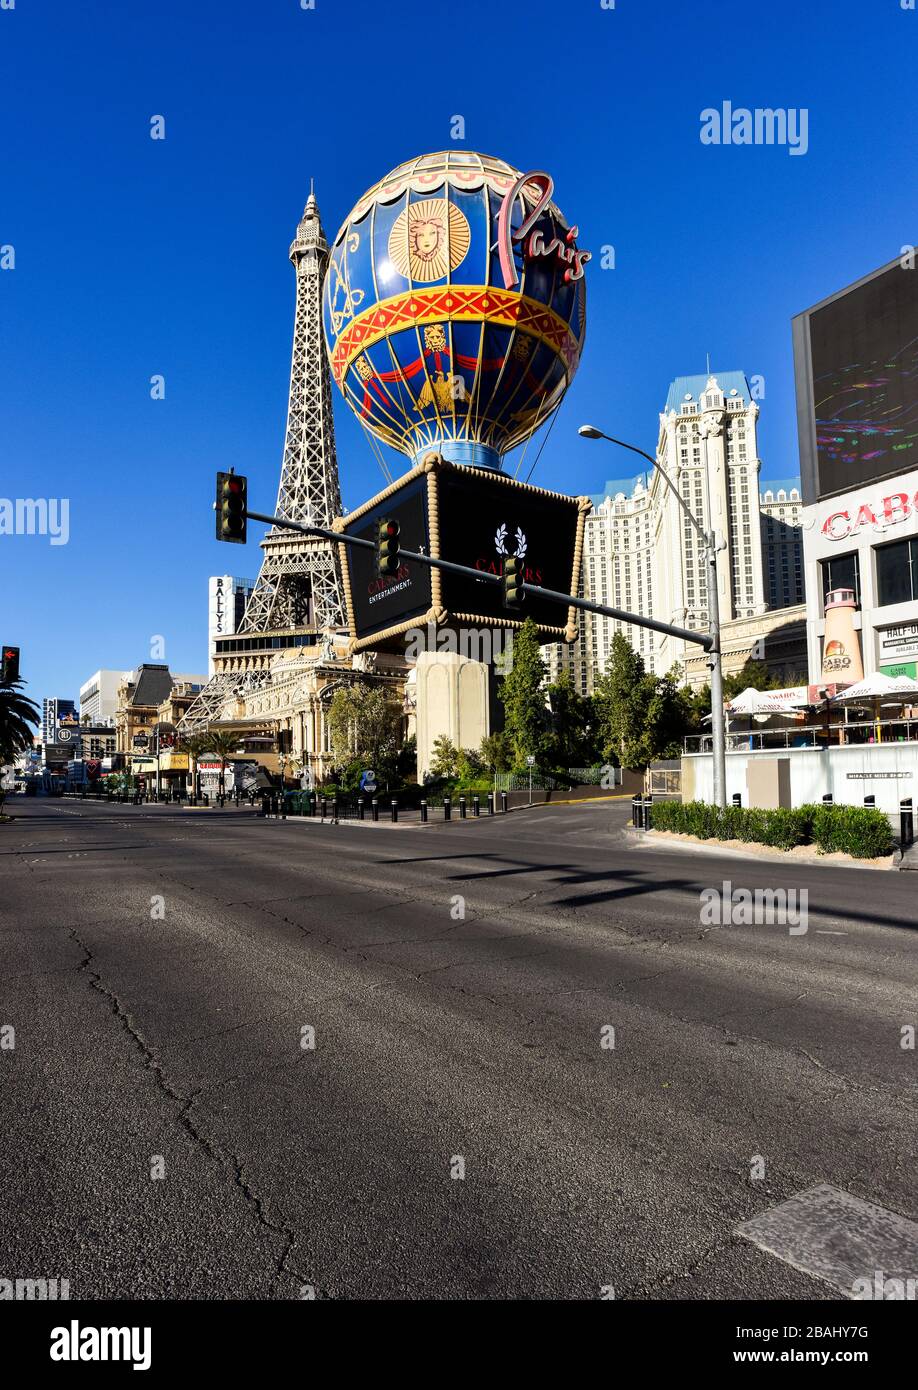 One week into the Las Vegas shut down due to Coronavirus, the Strip is fairly empty. Most residents seem to be heeding Governor Sisolak’s request you “Stay home for Nevada” with evidence of throughout Clark County, NV. The Empty Streets of Las Vegas Near Paris Casino and Resort on Las Vegas Blvd. Photo Credit: Ken Howard/Alamy Stock Photo